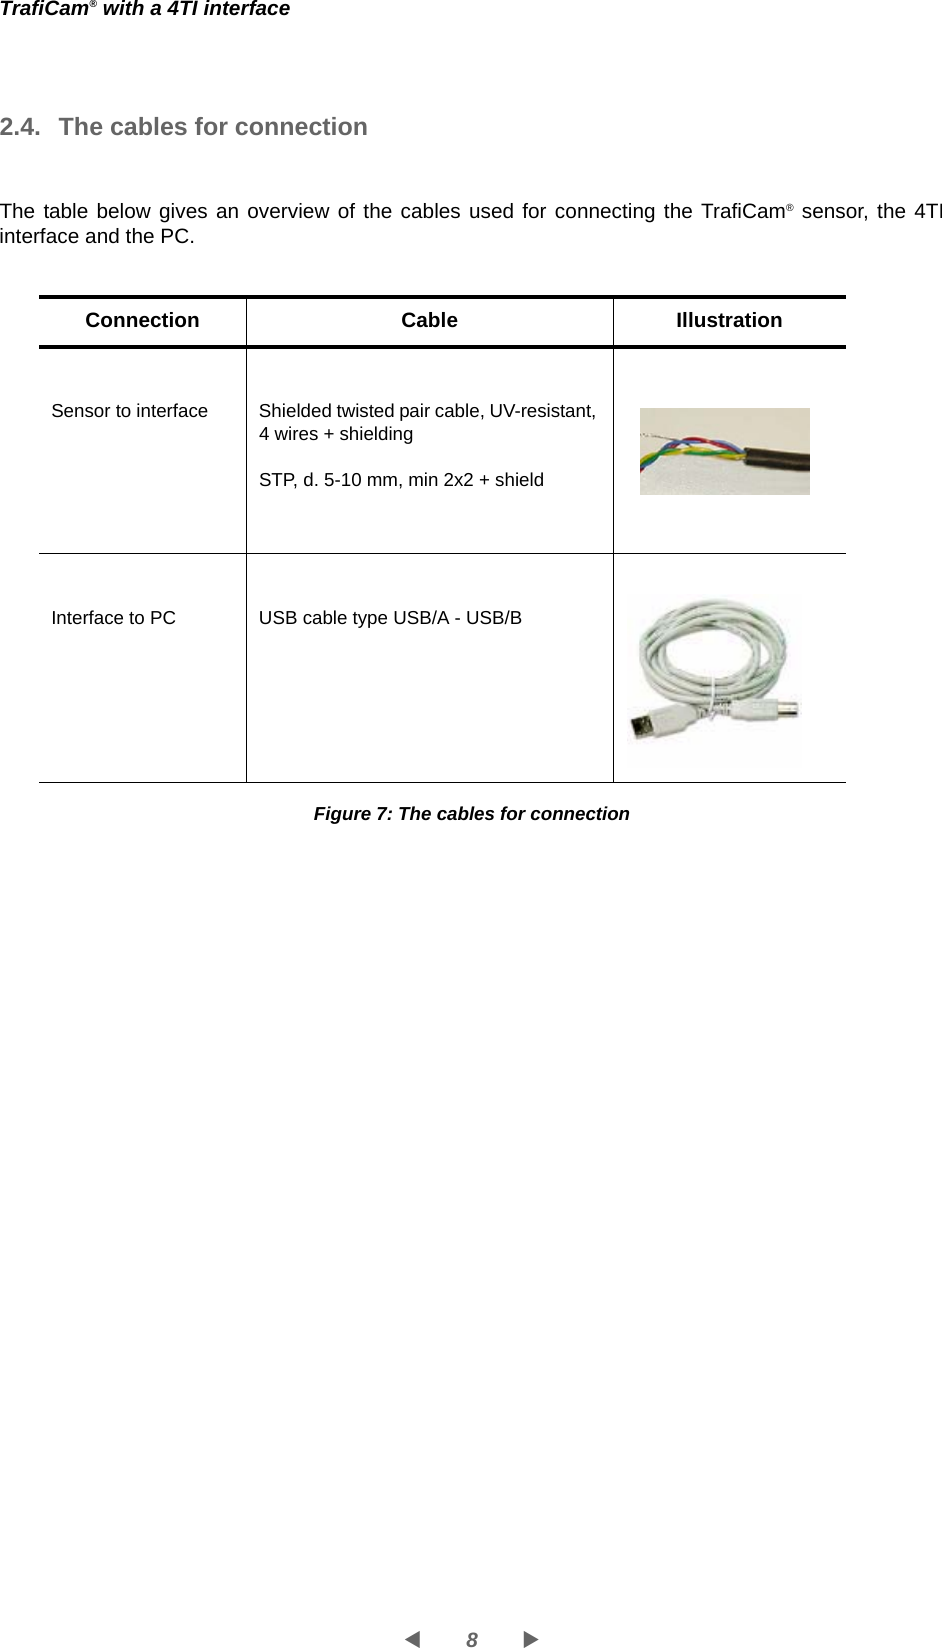 8WXTrafiCam® with a 4TI interface2.4.  The cables for connectionThe table below gives an overview of the cables used for connecting the TrafiCam® sensor, the 4TI interface and the PC.Figure 7: The cables for connectionConnection Cable IllustrationSensor to interface Shielded twisted pair cable, UV-resistant, 4 wires + shieldingSTP, d. 5-10 mm, min 2x2 + shieldInterface to PC USB cable type USB/A - USB/B